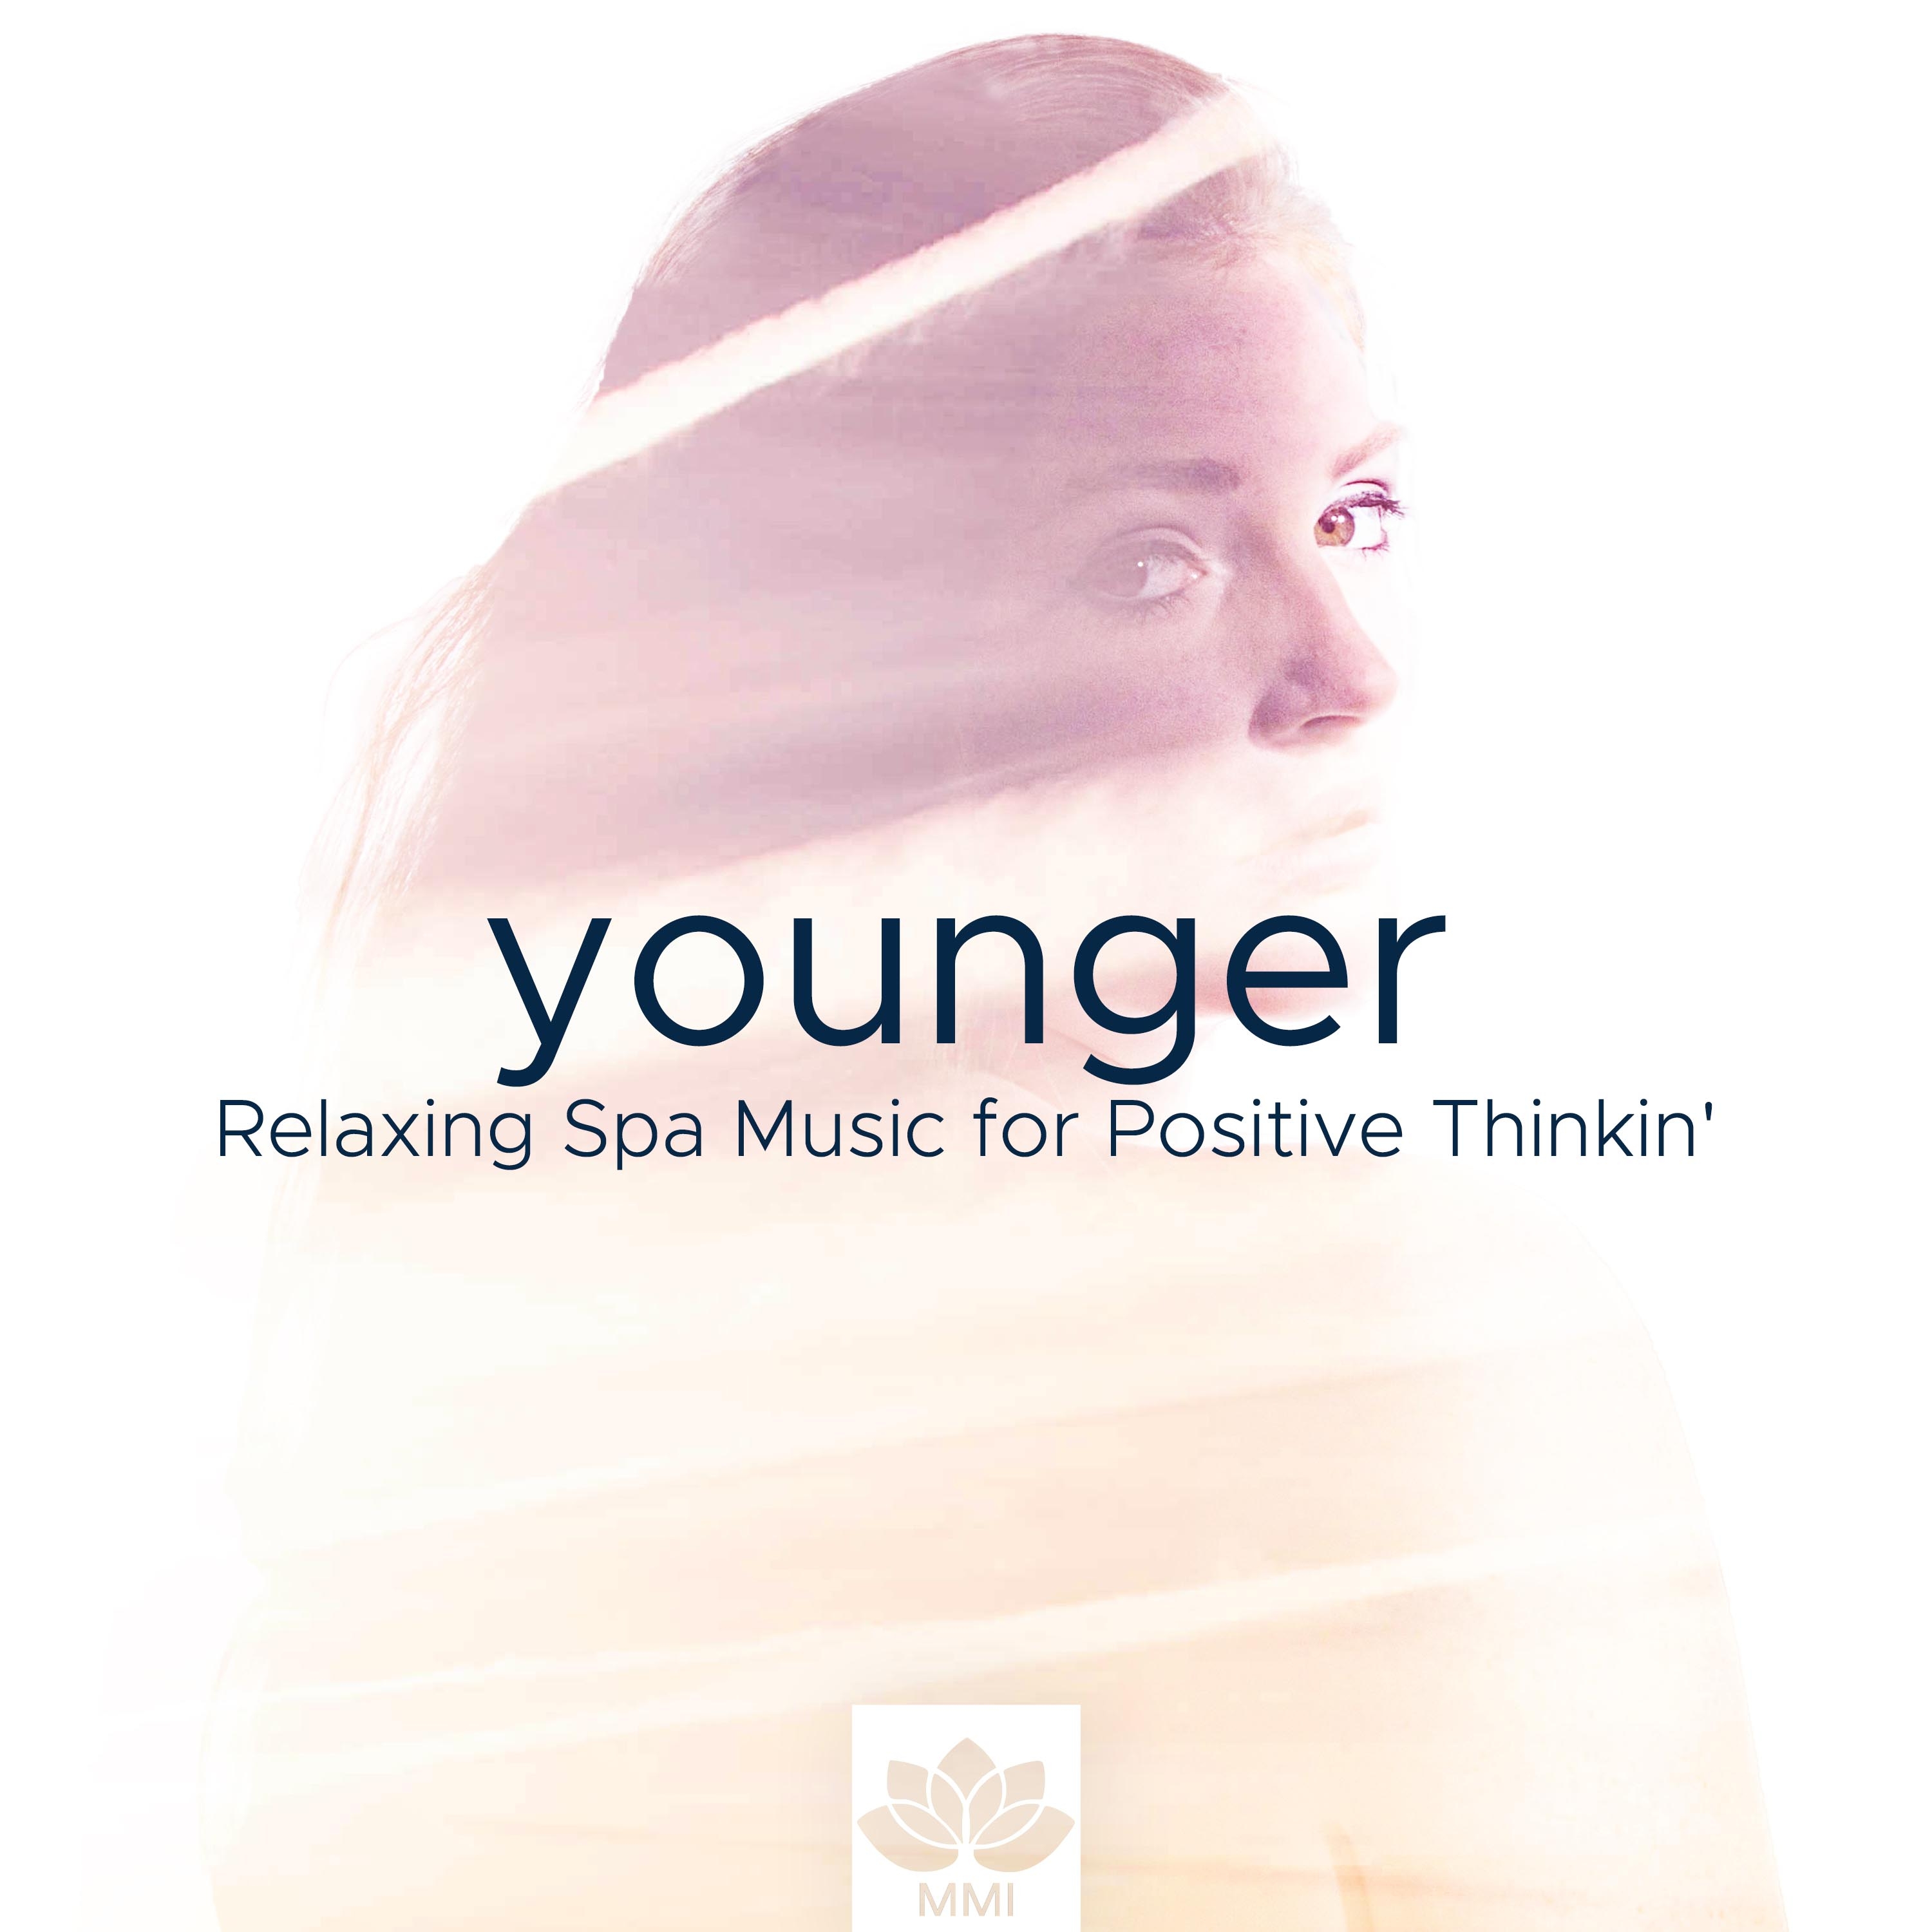 Younger - Relaxing Spa Music for Positive Thinkin', Relax Now with the Best Collection of NAture Sounds (Rain, Ocean Waves, Forest, Wind)